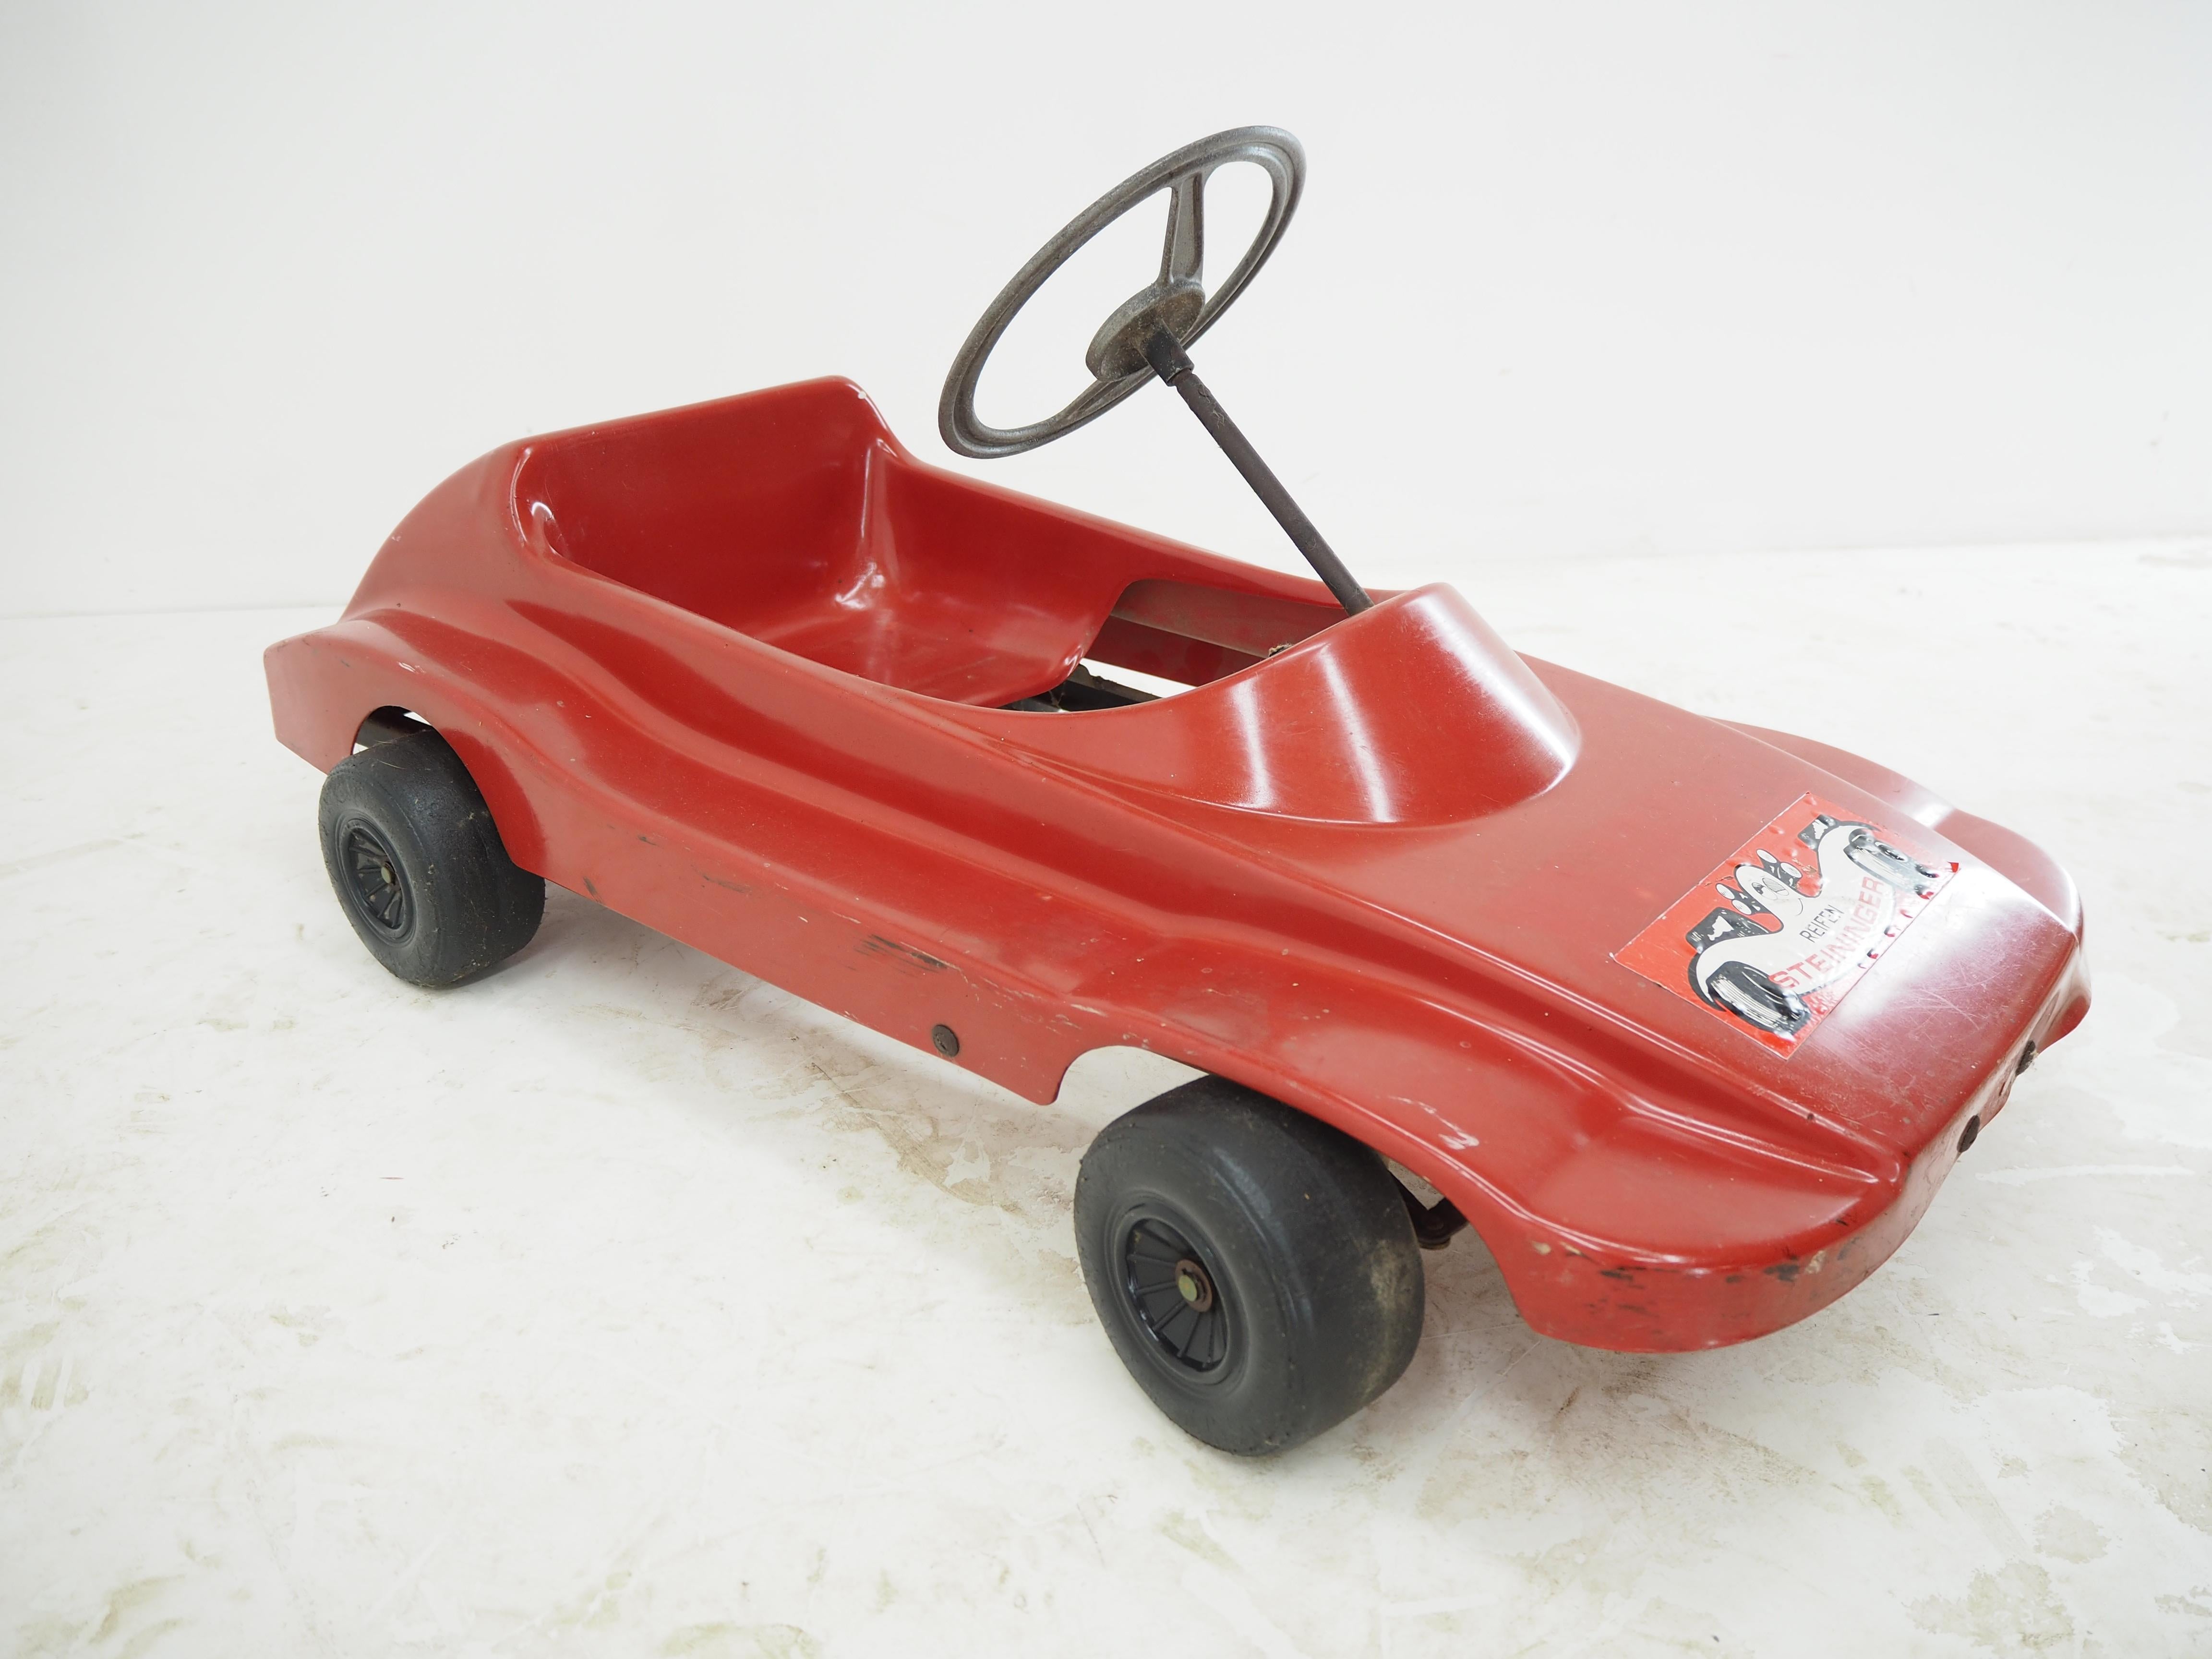 pedal cars from the 1960s